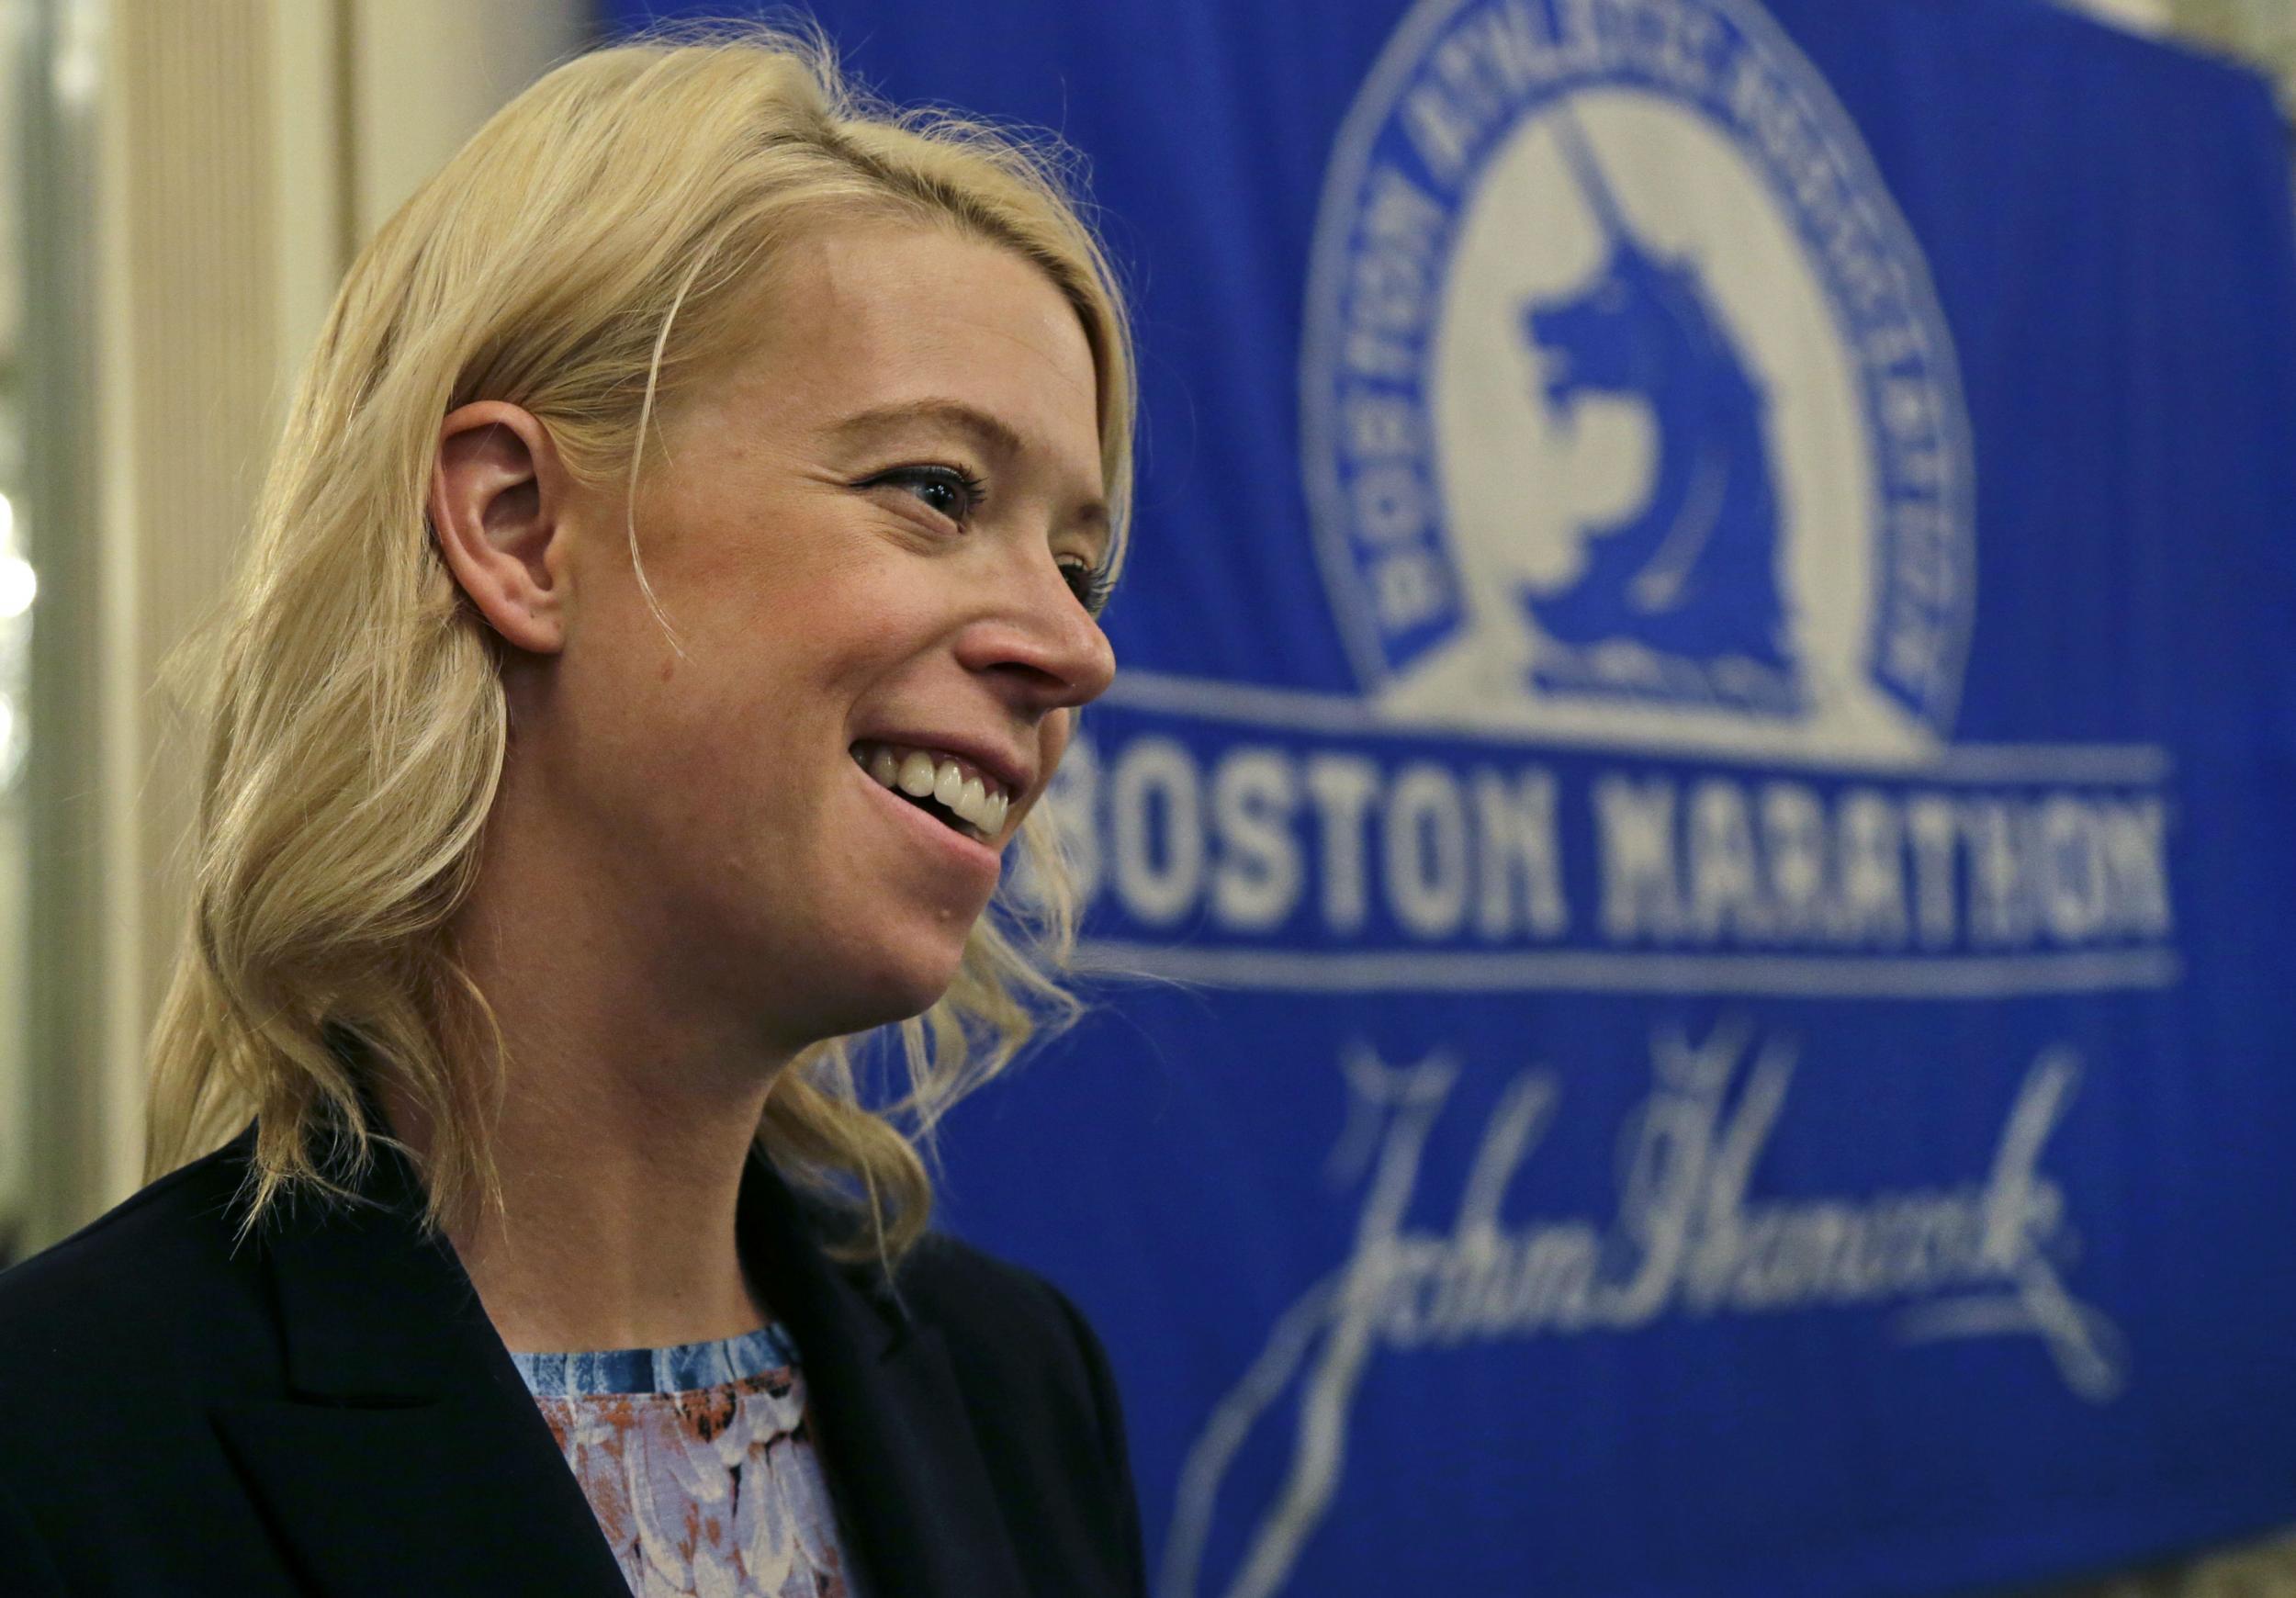 Adrianne Haslet was fitted with a prosthetic limb